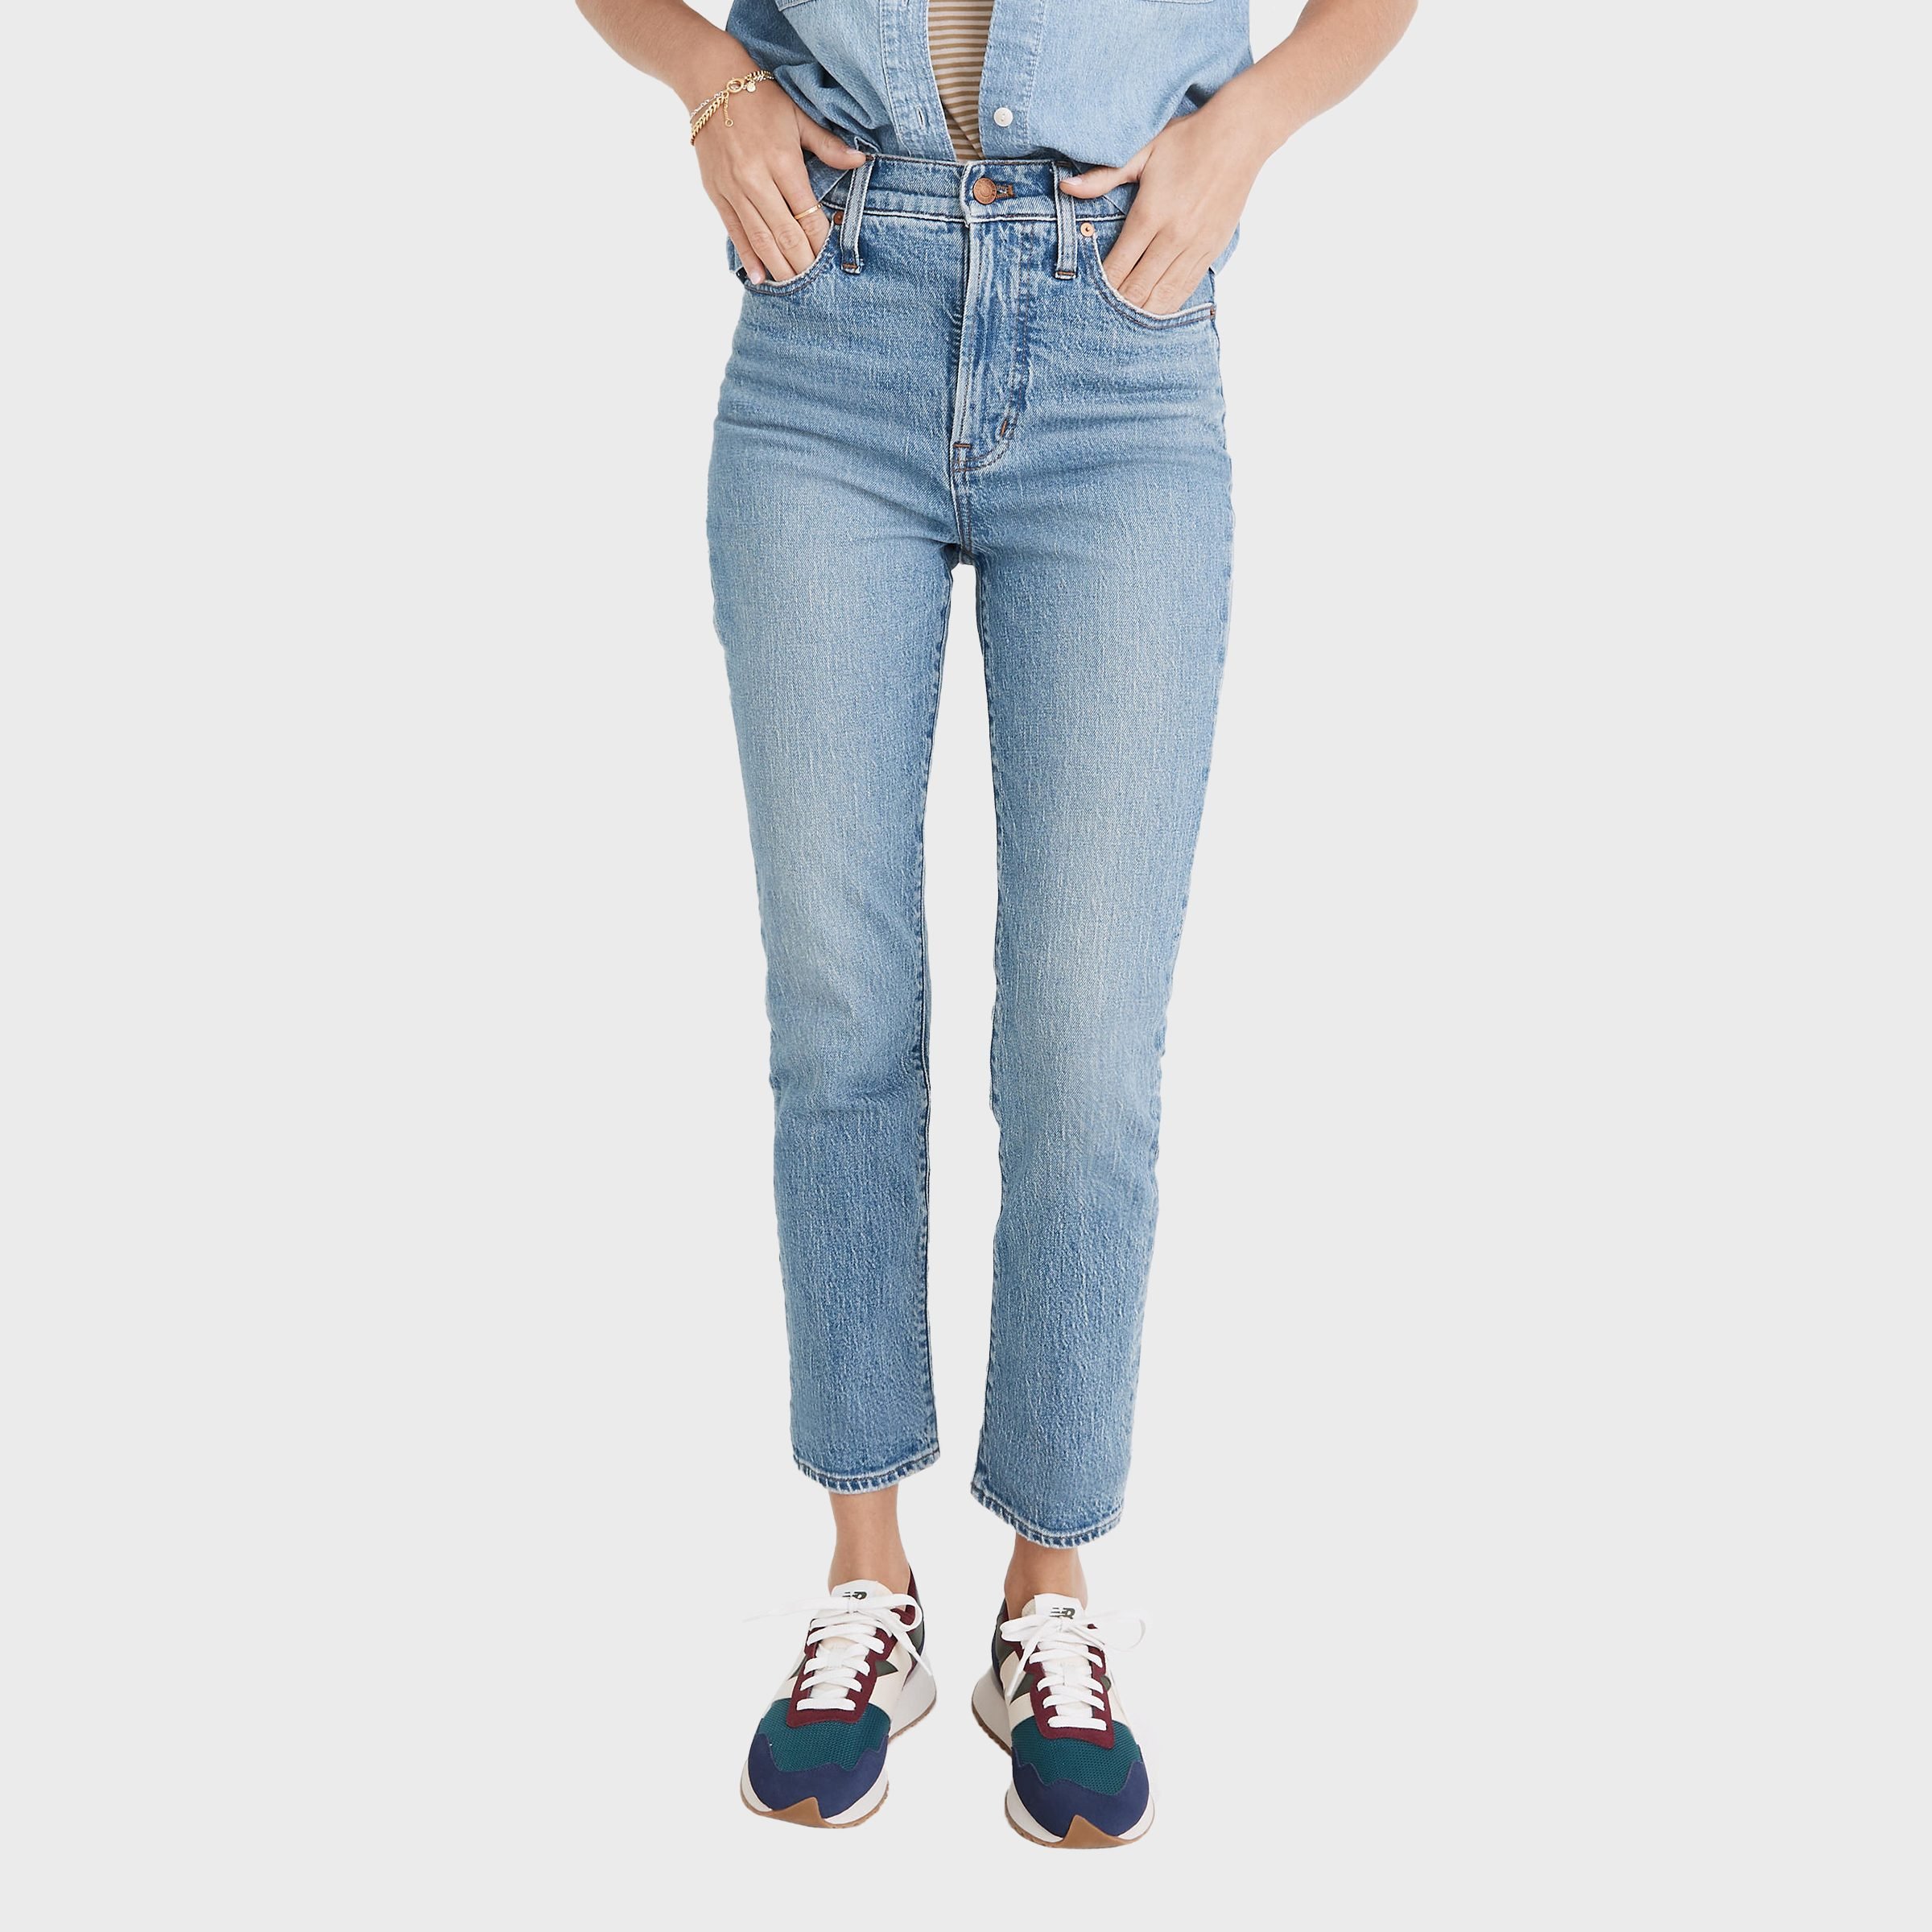 The 23 Best Jeans for Women 2023 — Flattering Jeans for Everyone